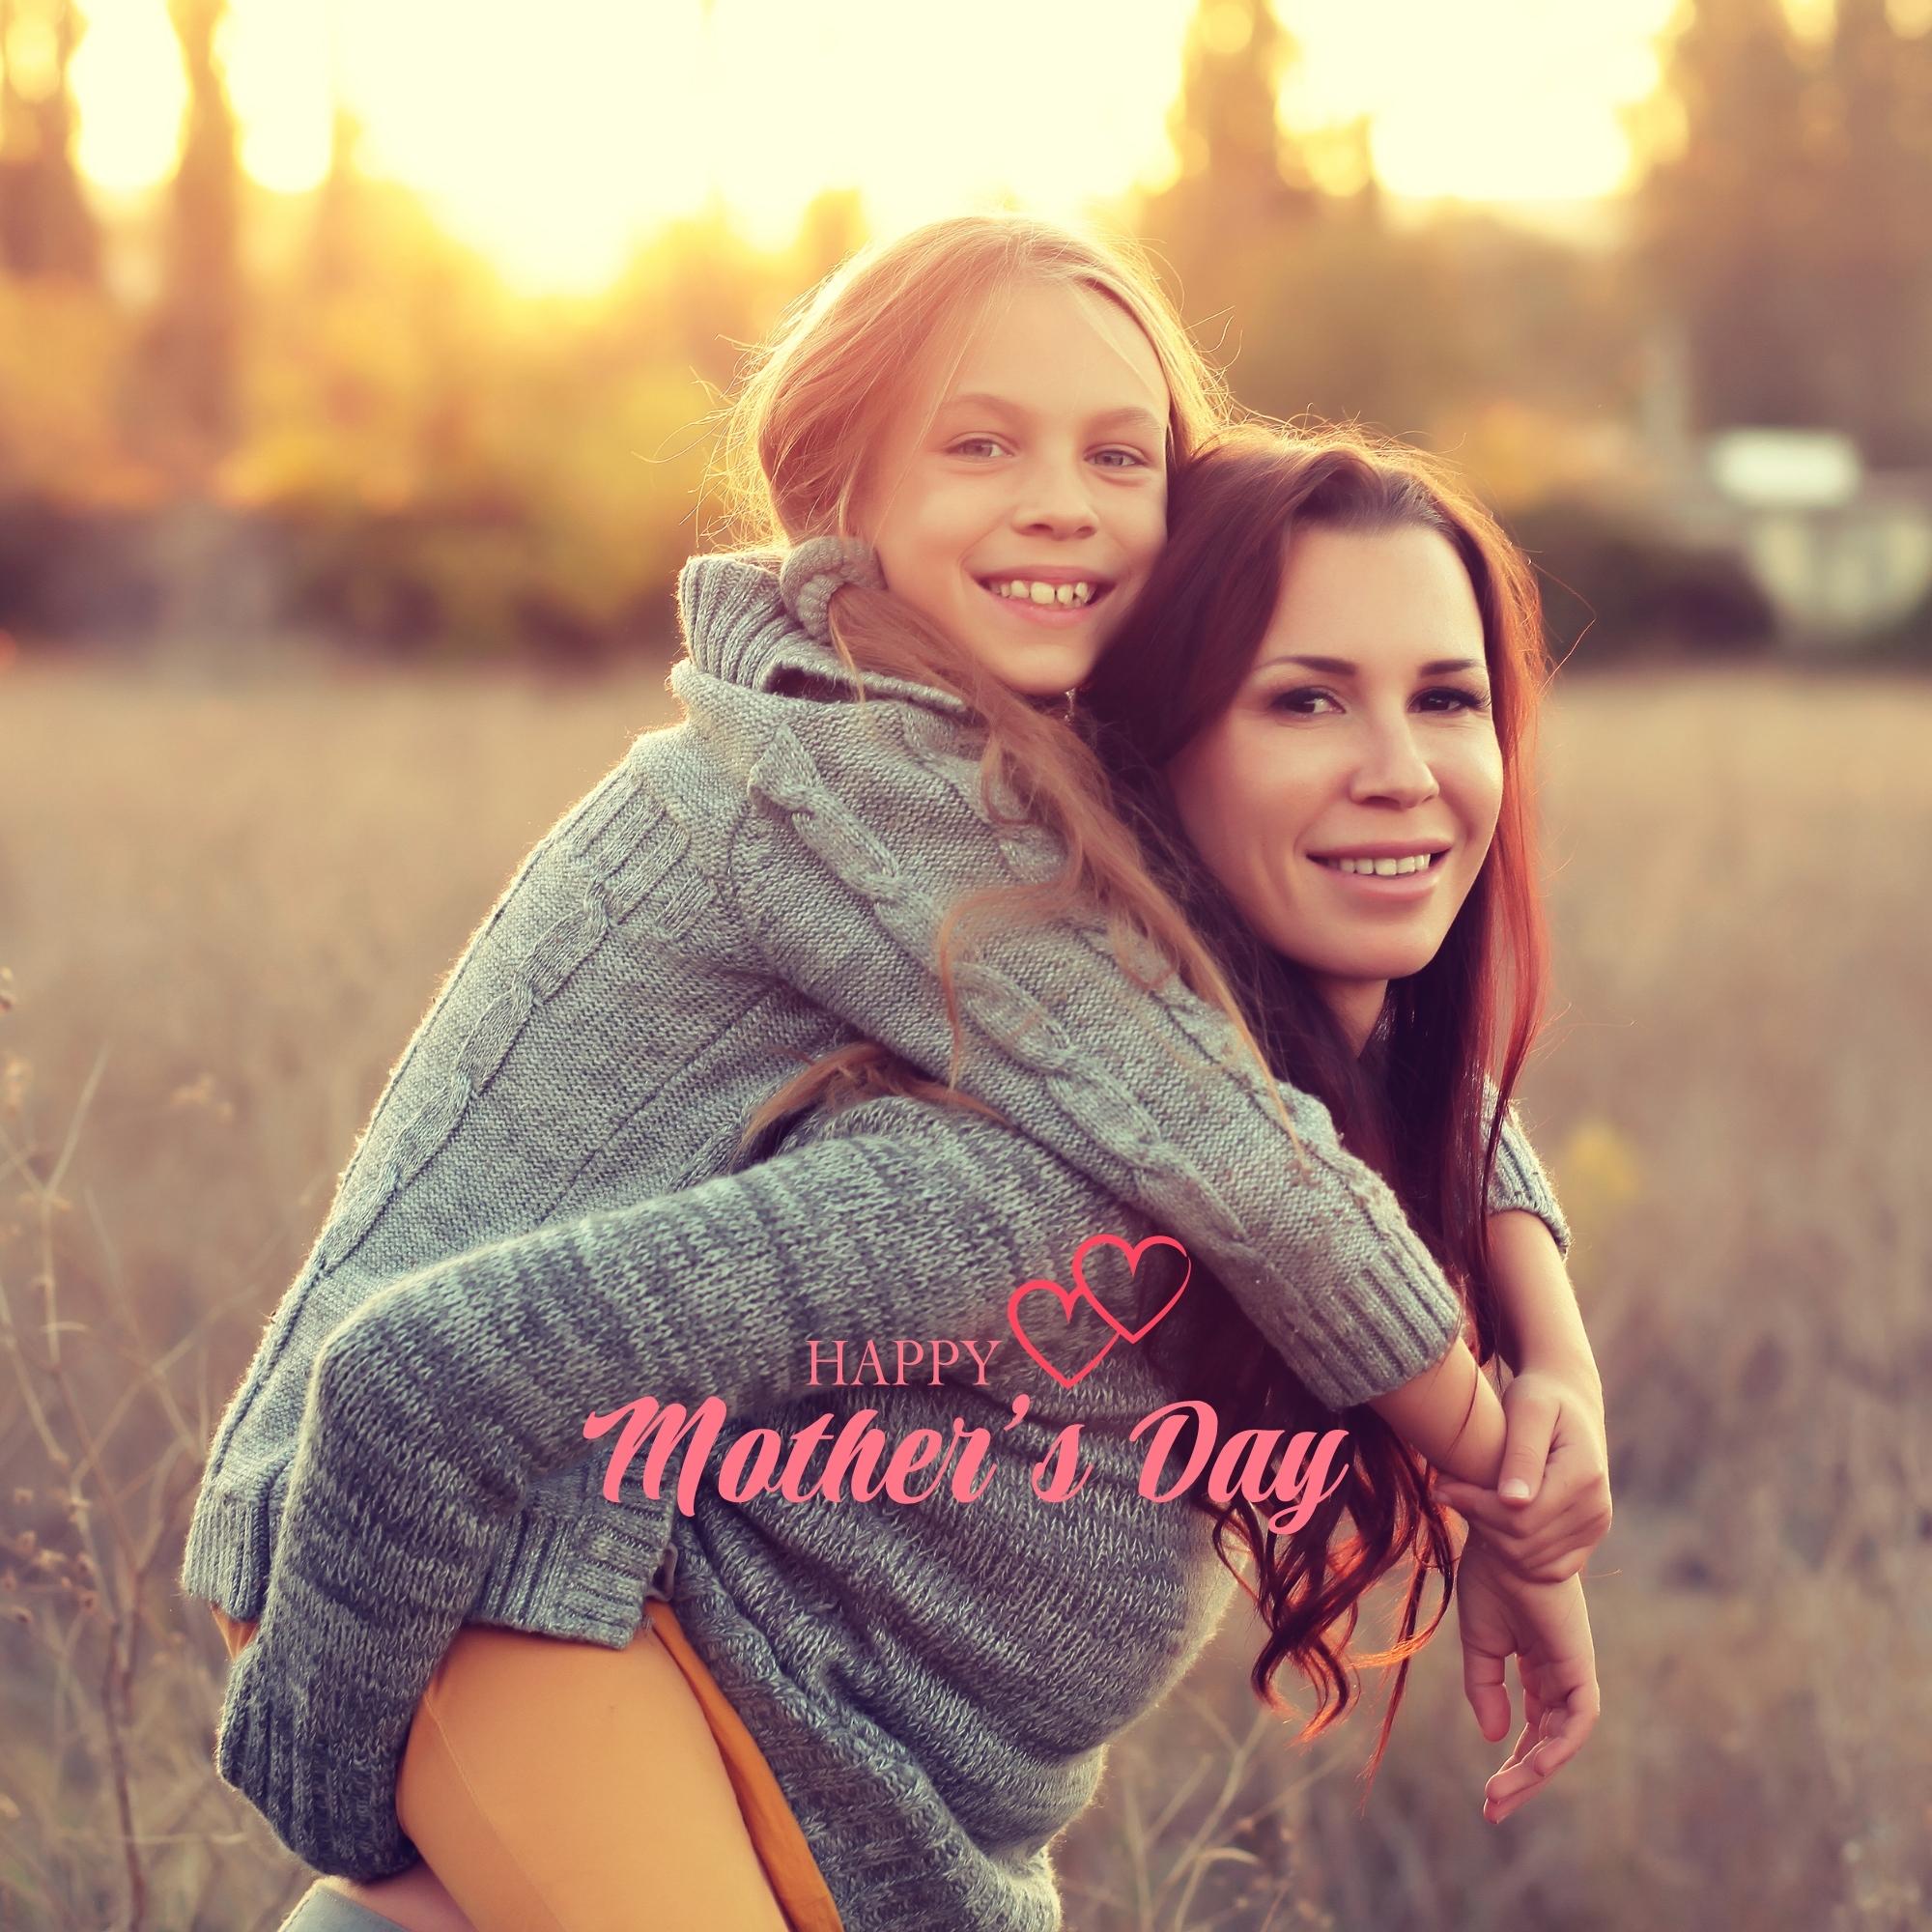 Happy Mothers Day Images | 1044 | Free Download [8k,4k,Hd]